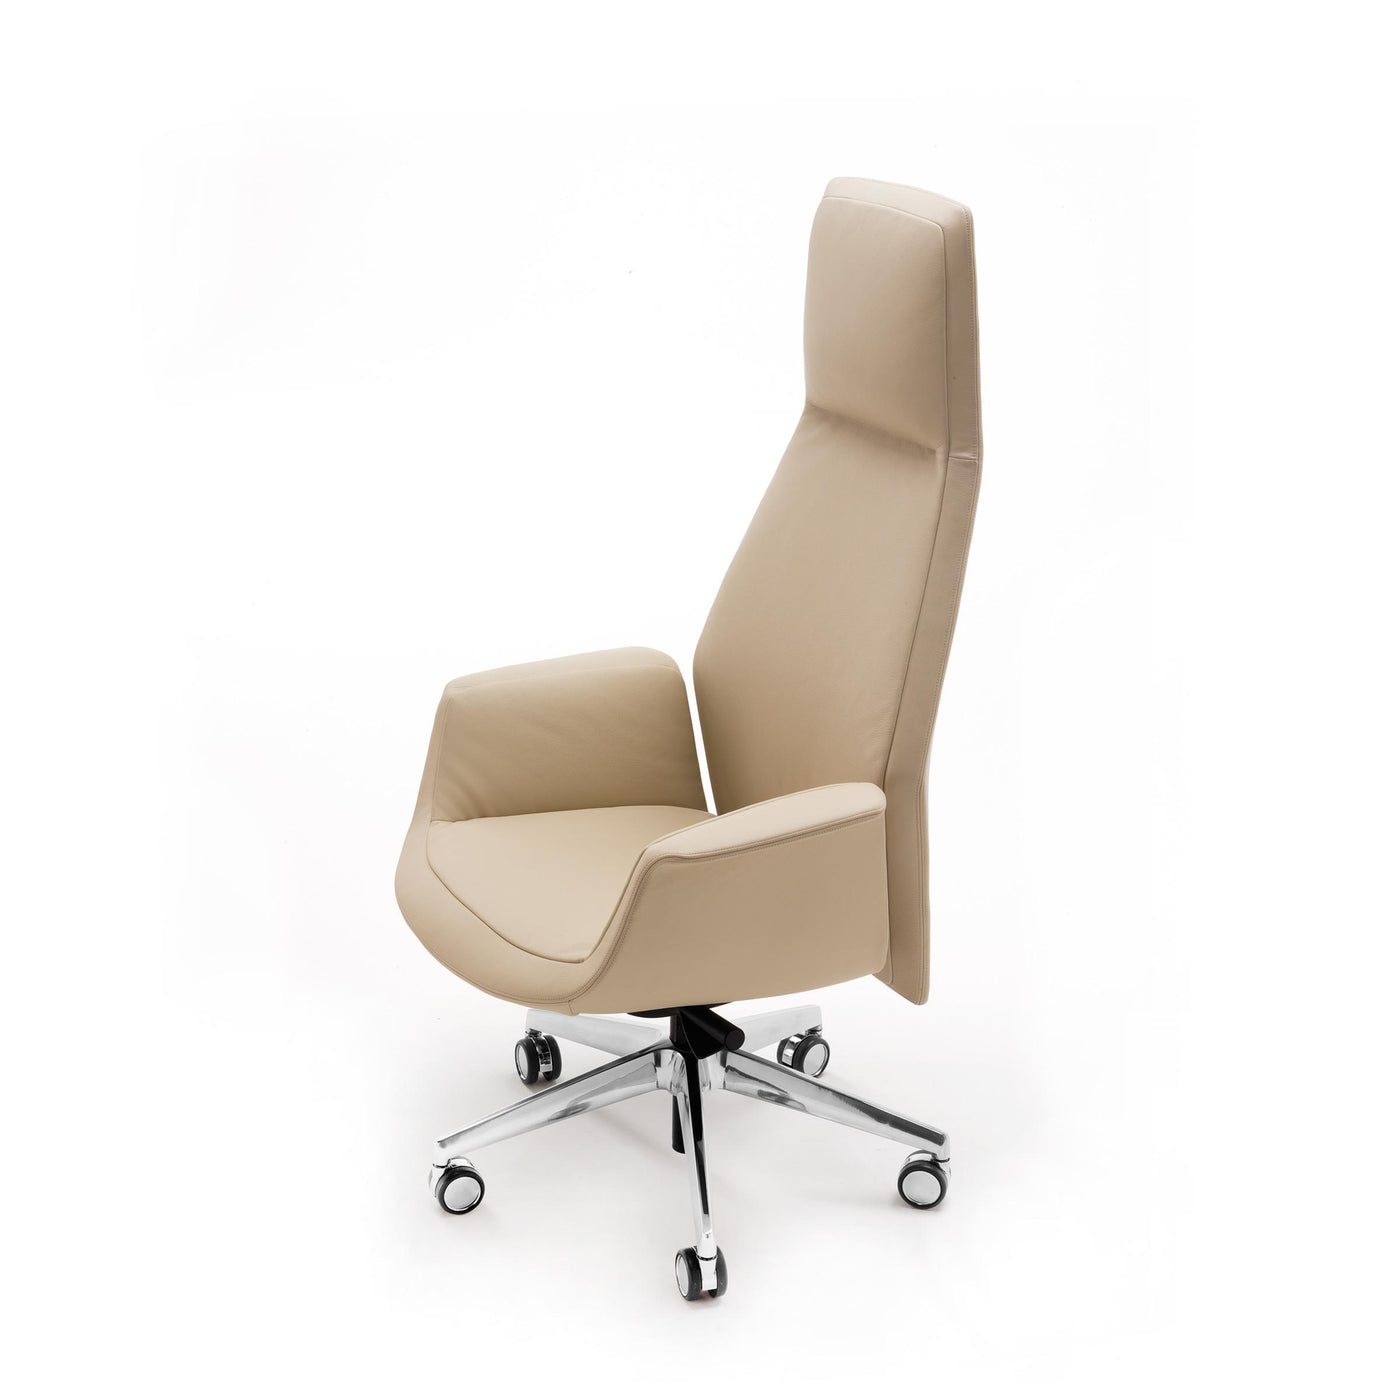 High Back Swivel Chair with Wheels DOWNTOWN PRESIDENT by Jean-Marie Massaud for Poltrona Frau 16